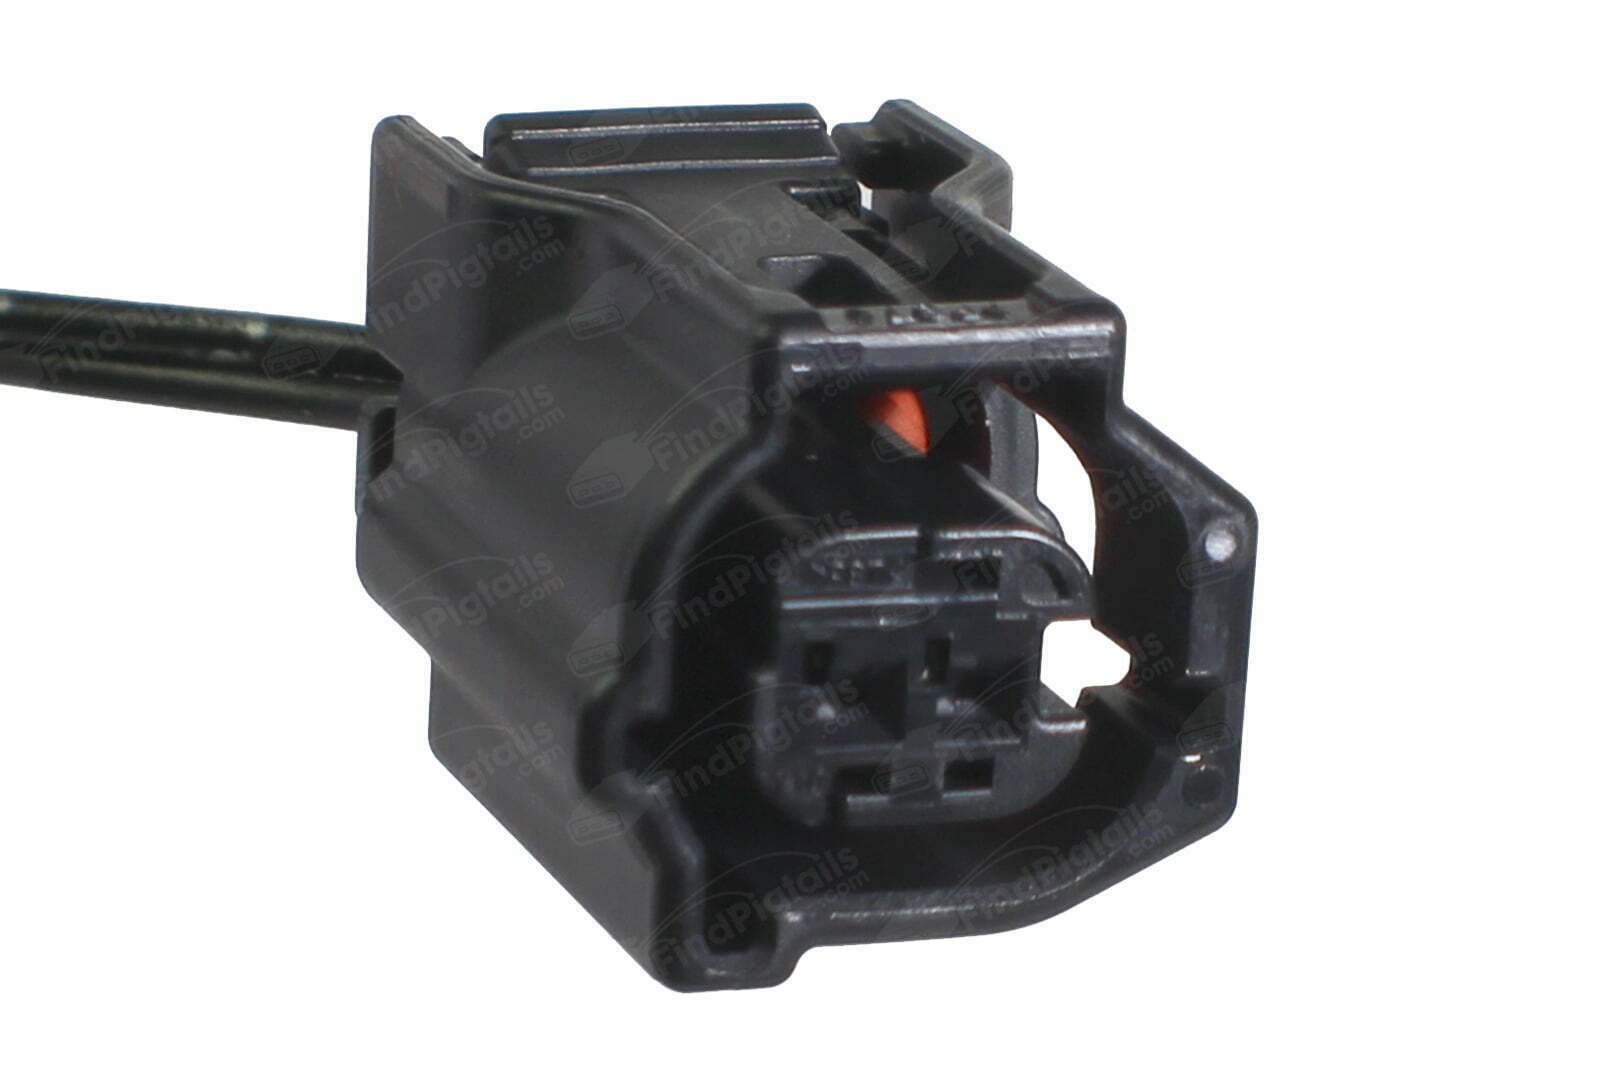 Y47CX is a 2-pin automotive connector which serves at least 592 functions for 77+ vehicles.